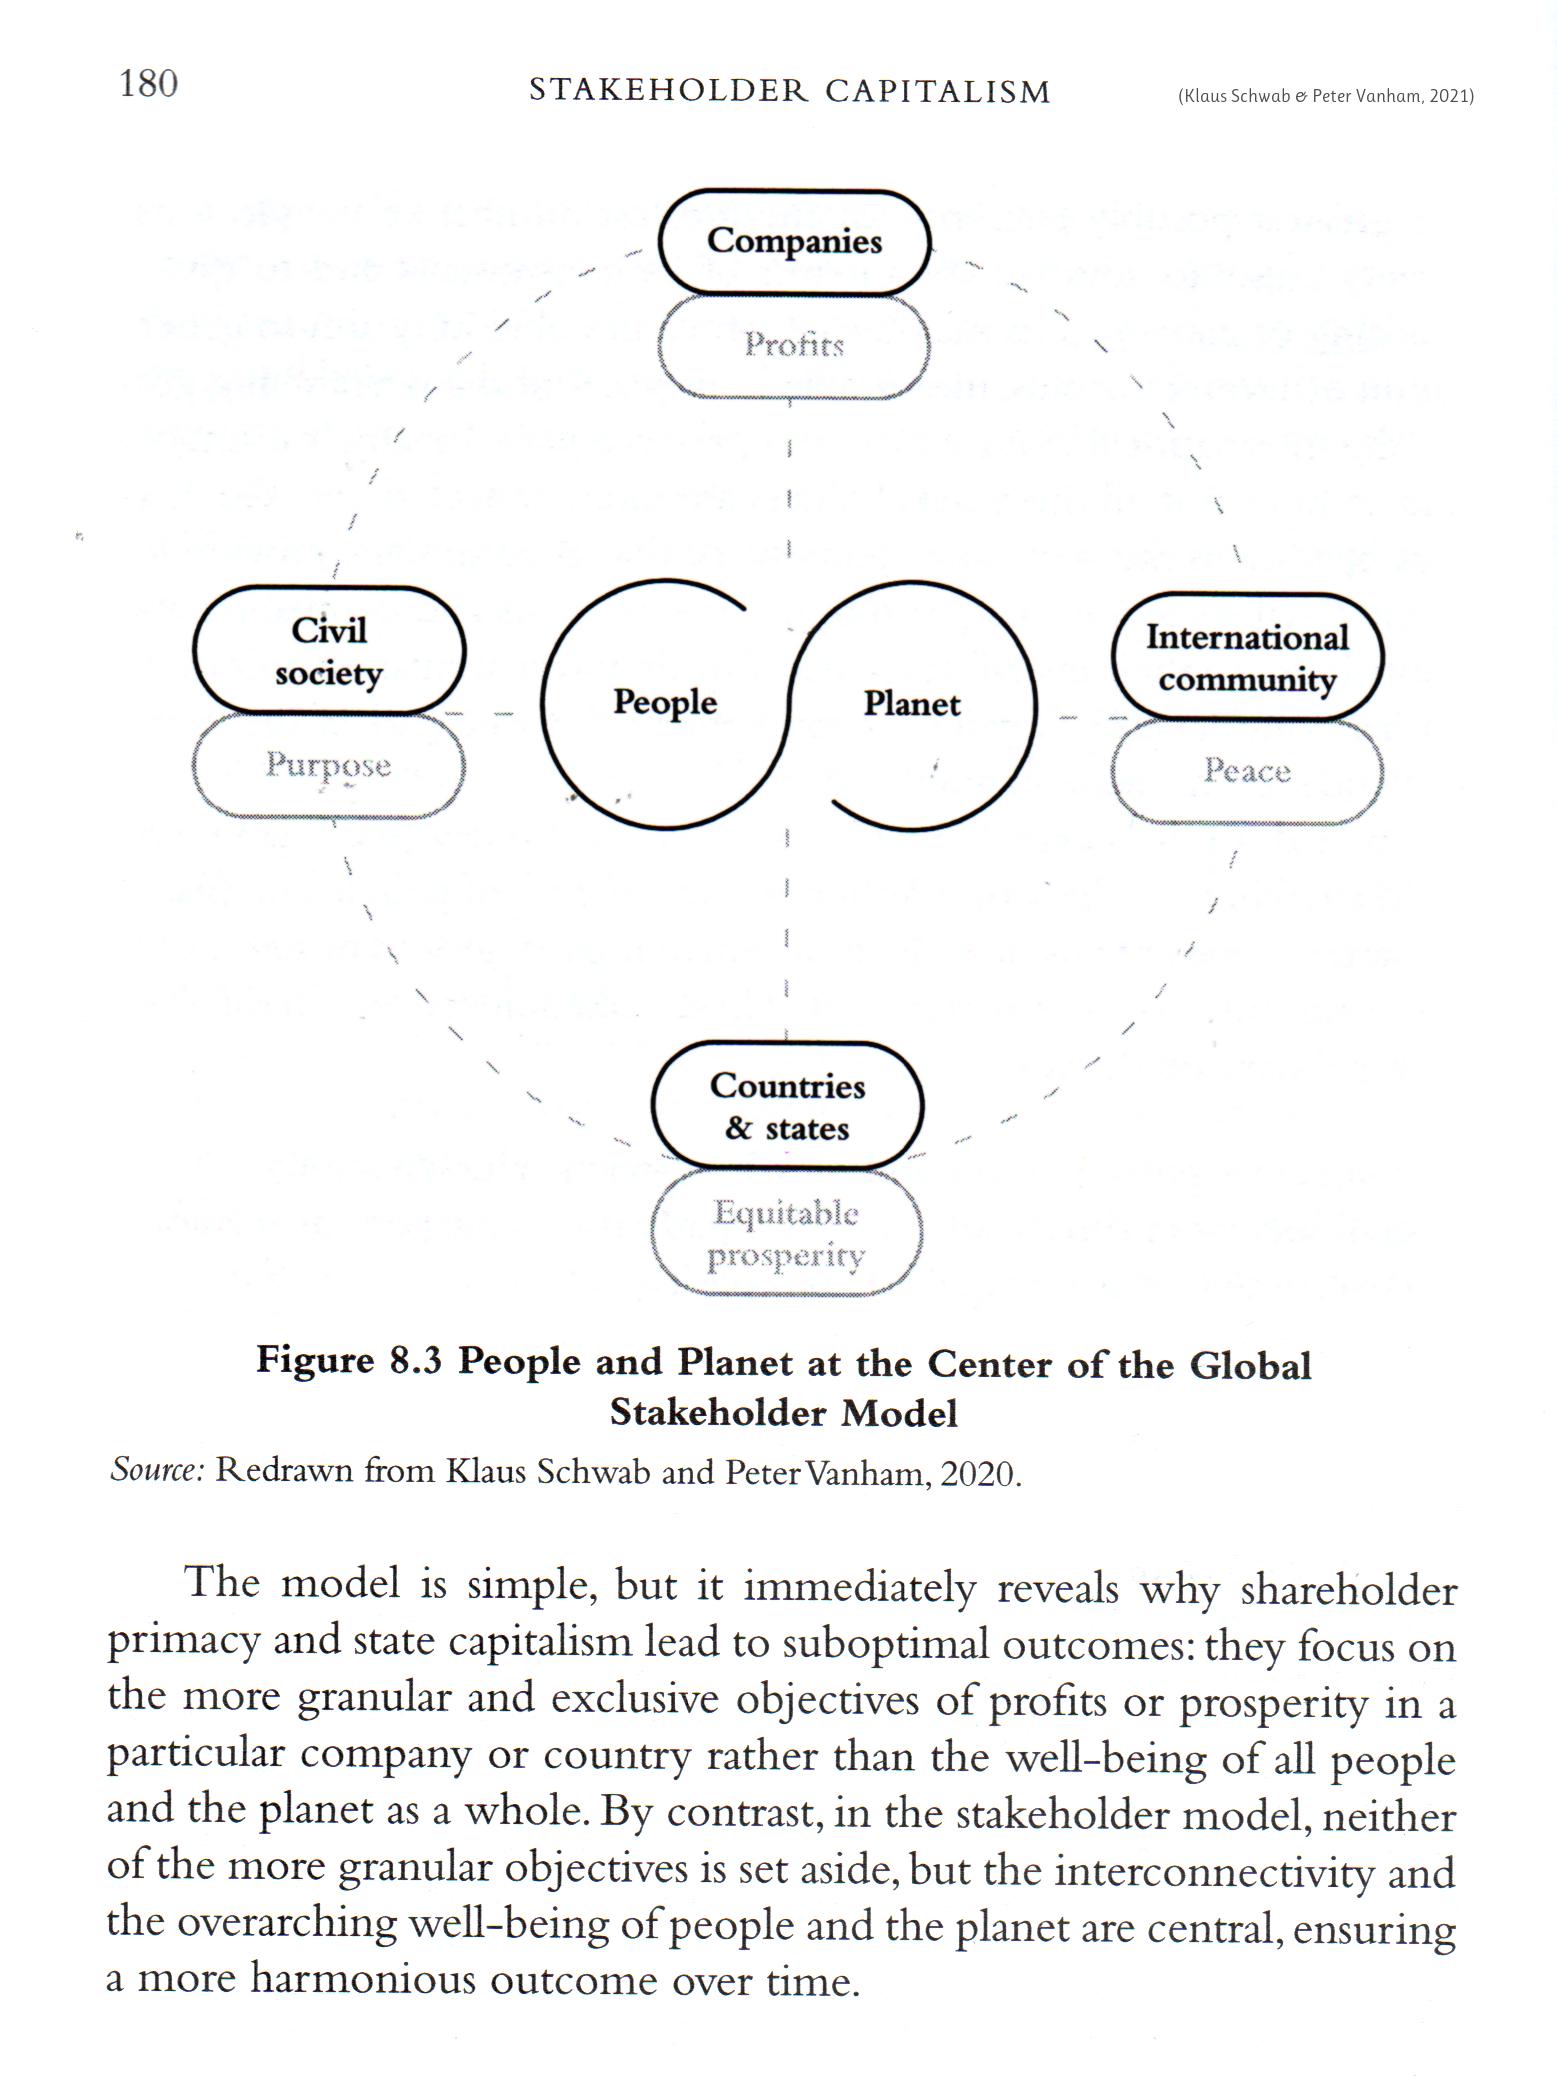 The concept model of stakeholder capitalism.